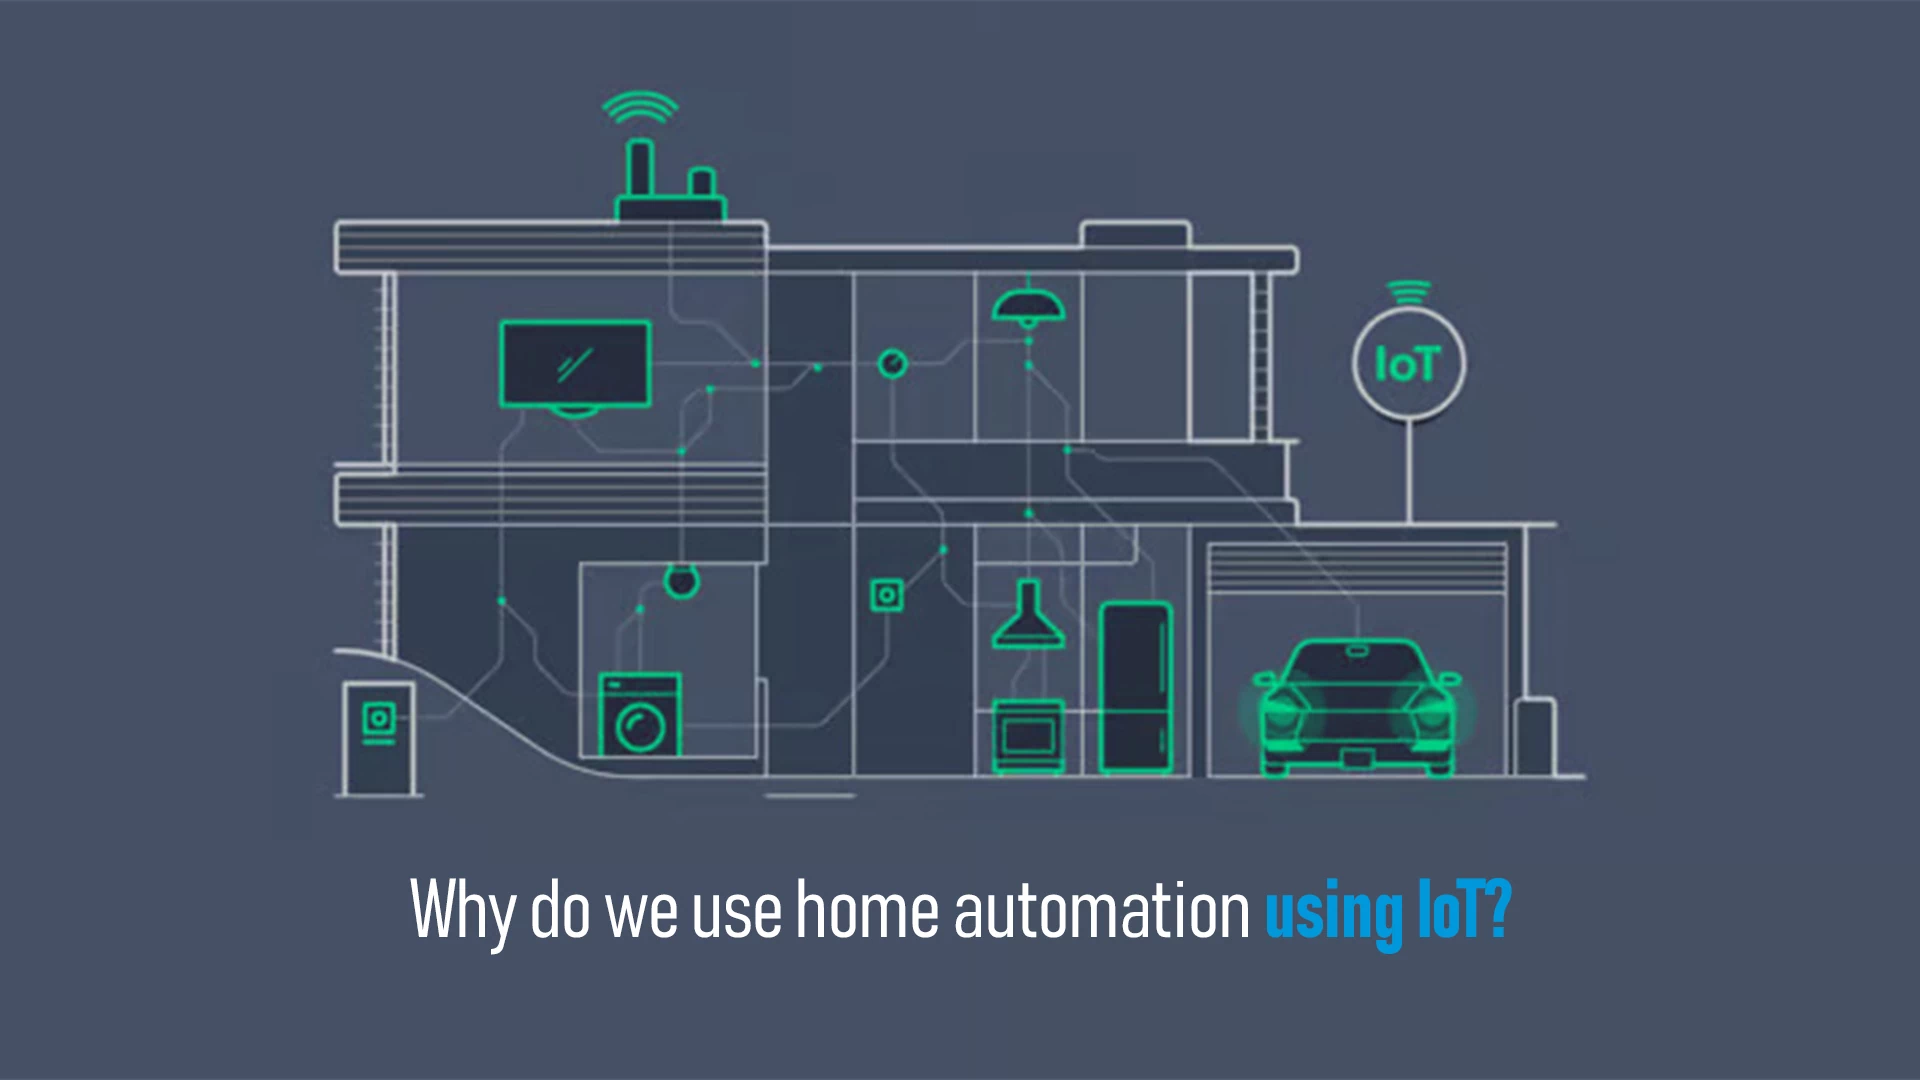 Why do we use home automation using IoT?